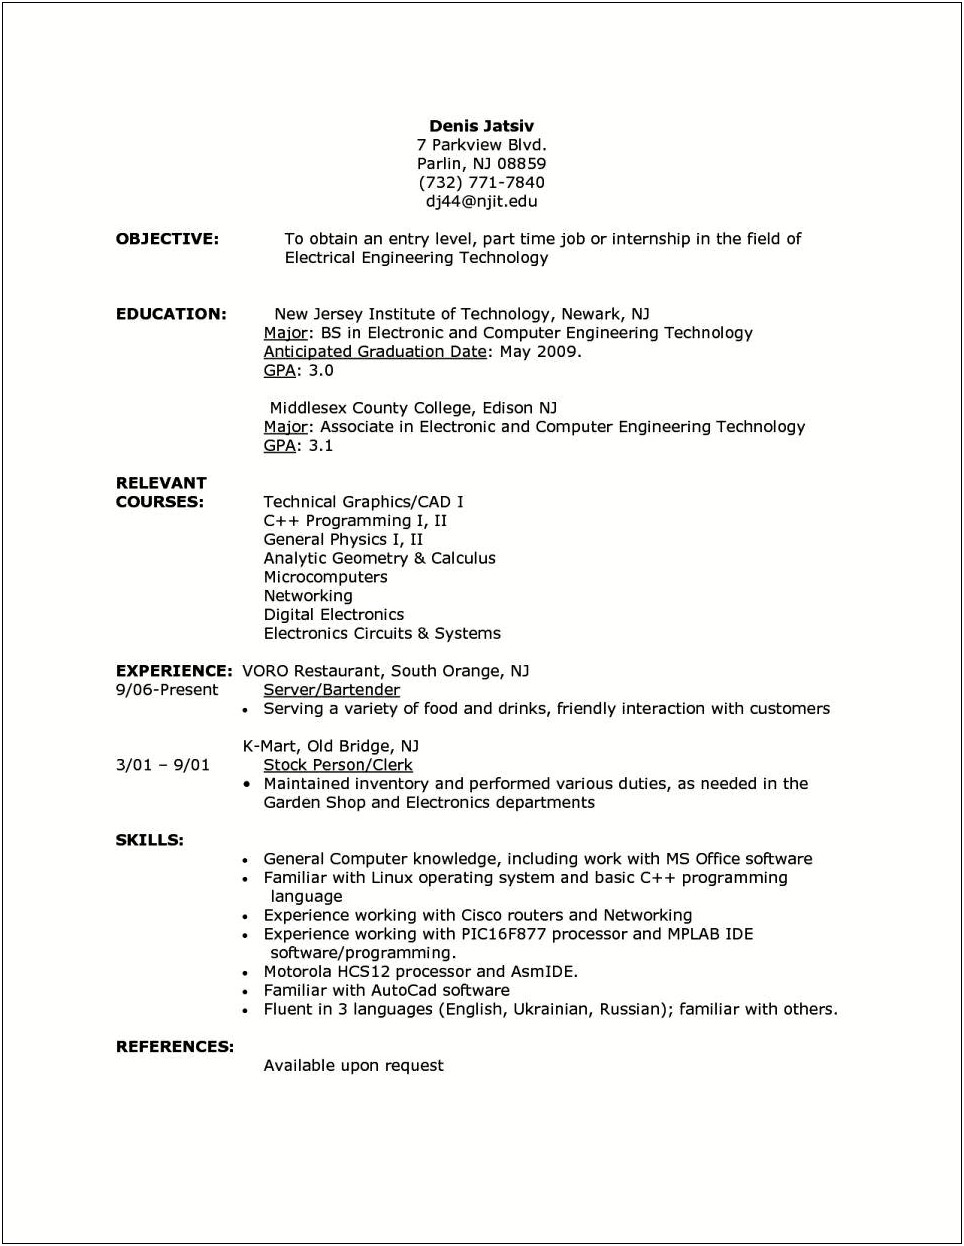 Resume Help For Out Of Work Time